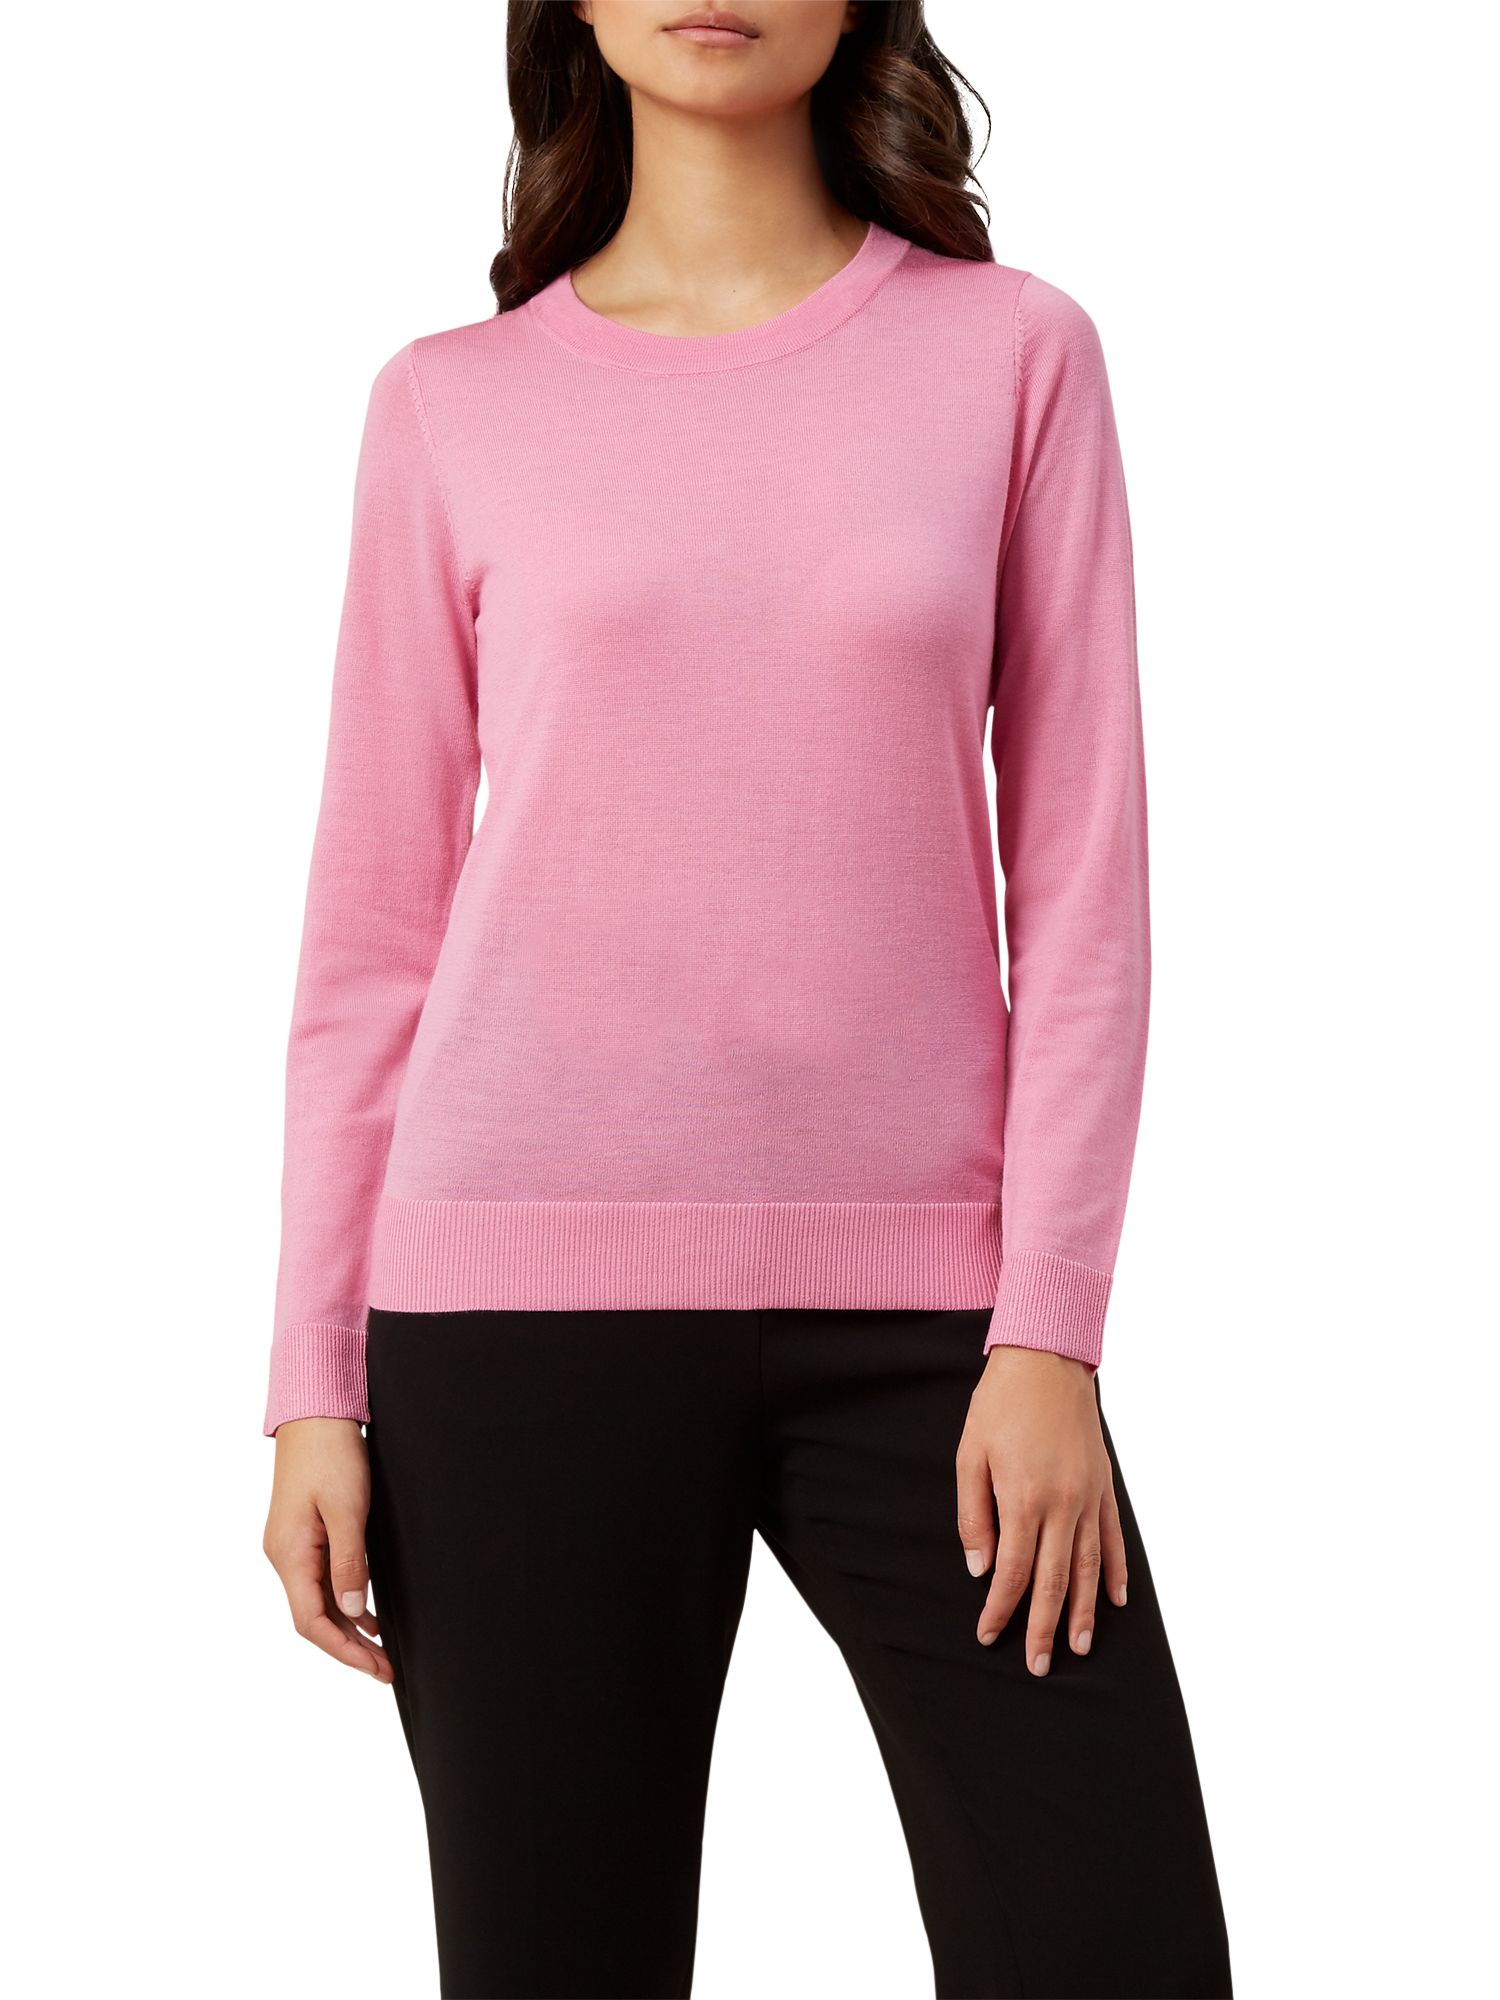 Hobbs Penny Knitted Sweater at John Lewis & Partners